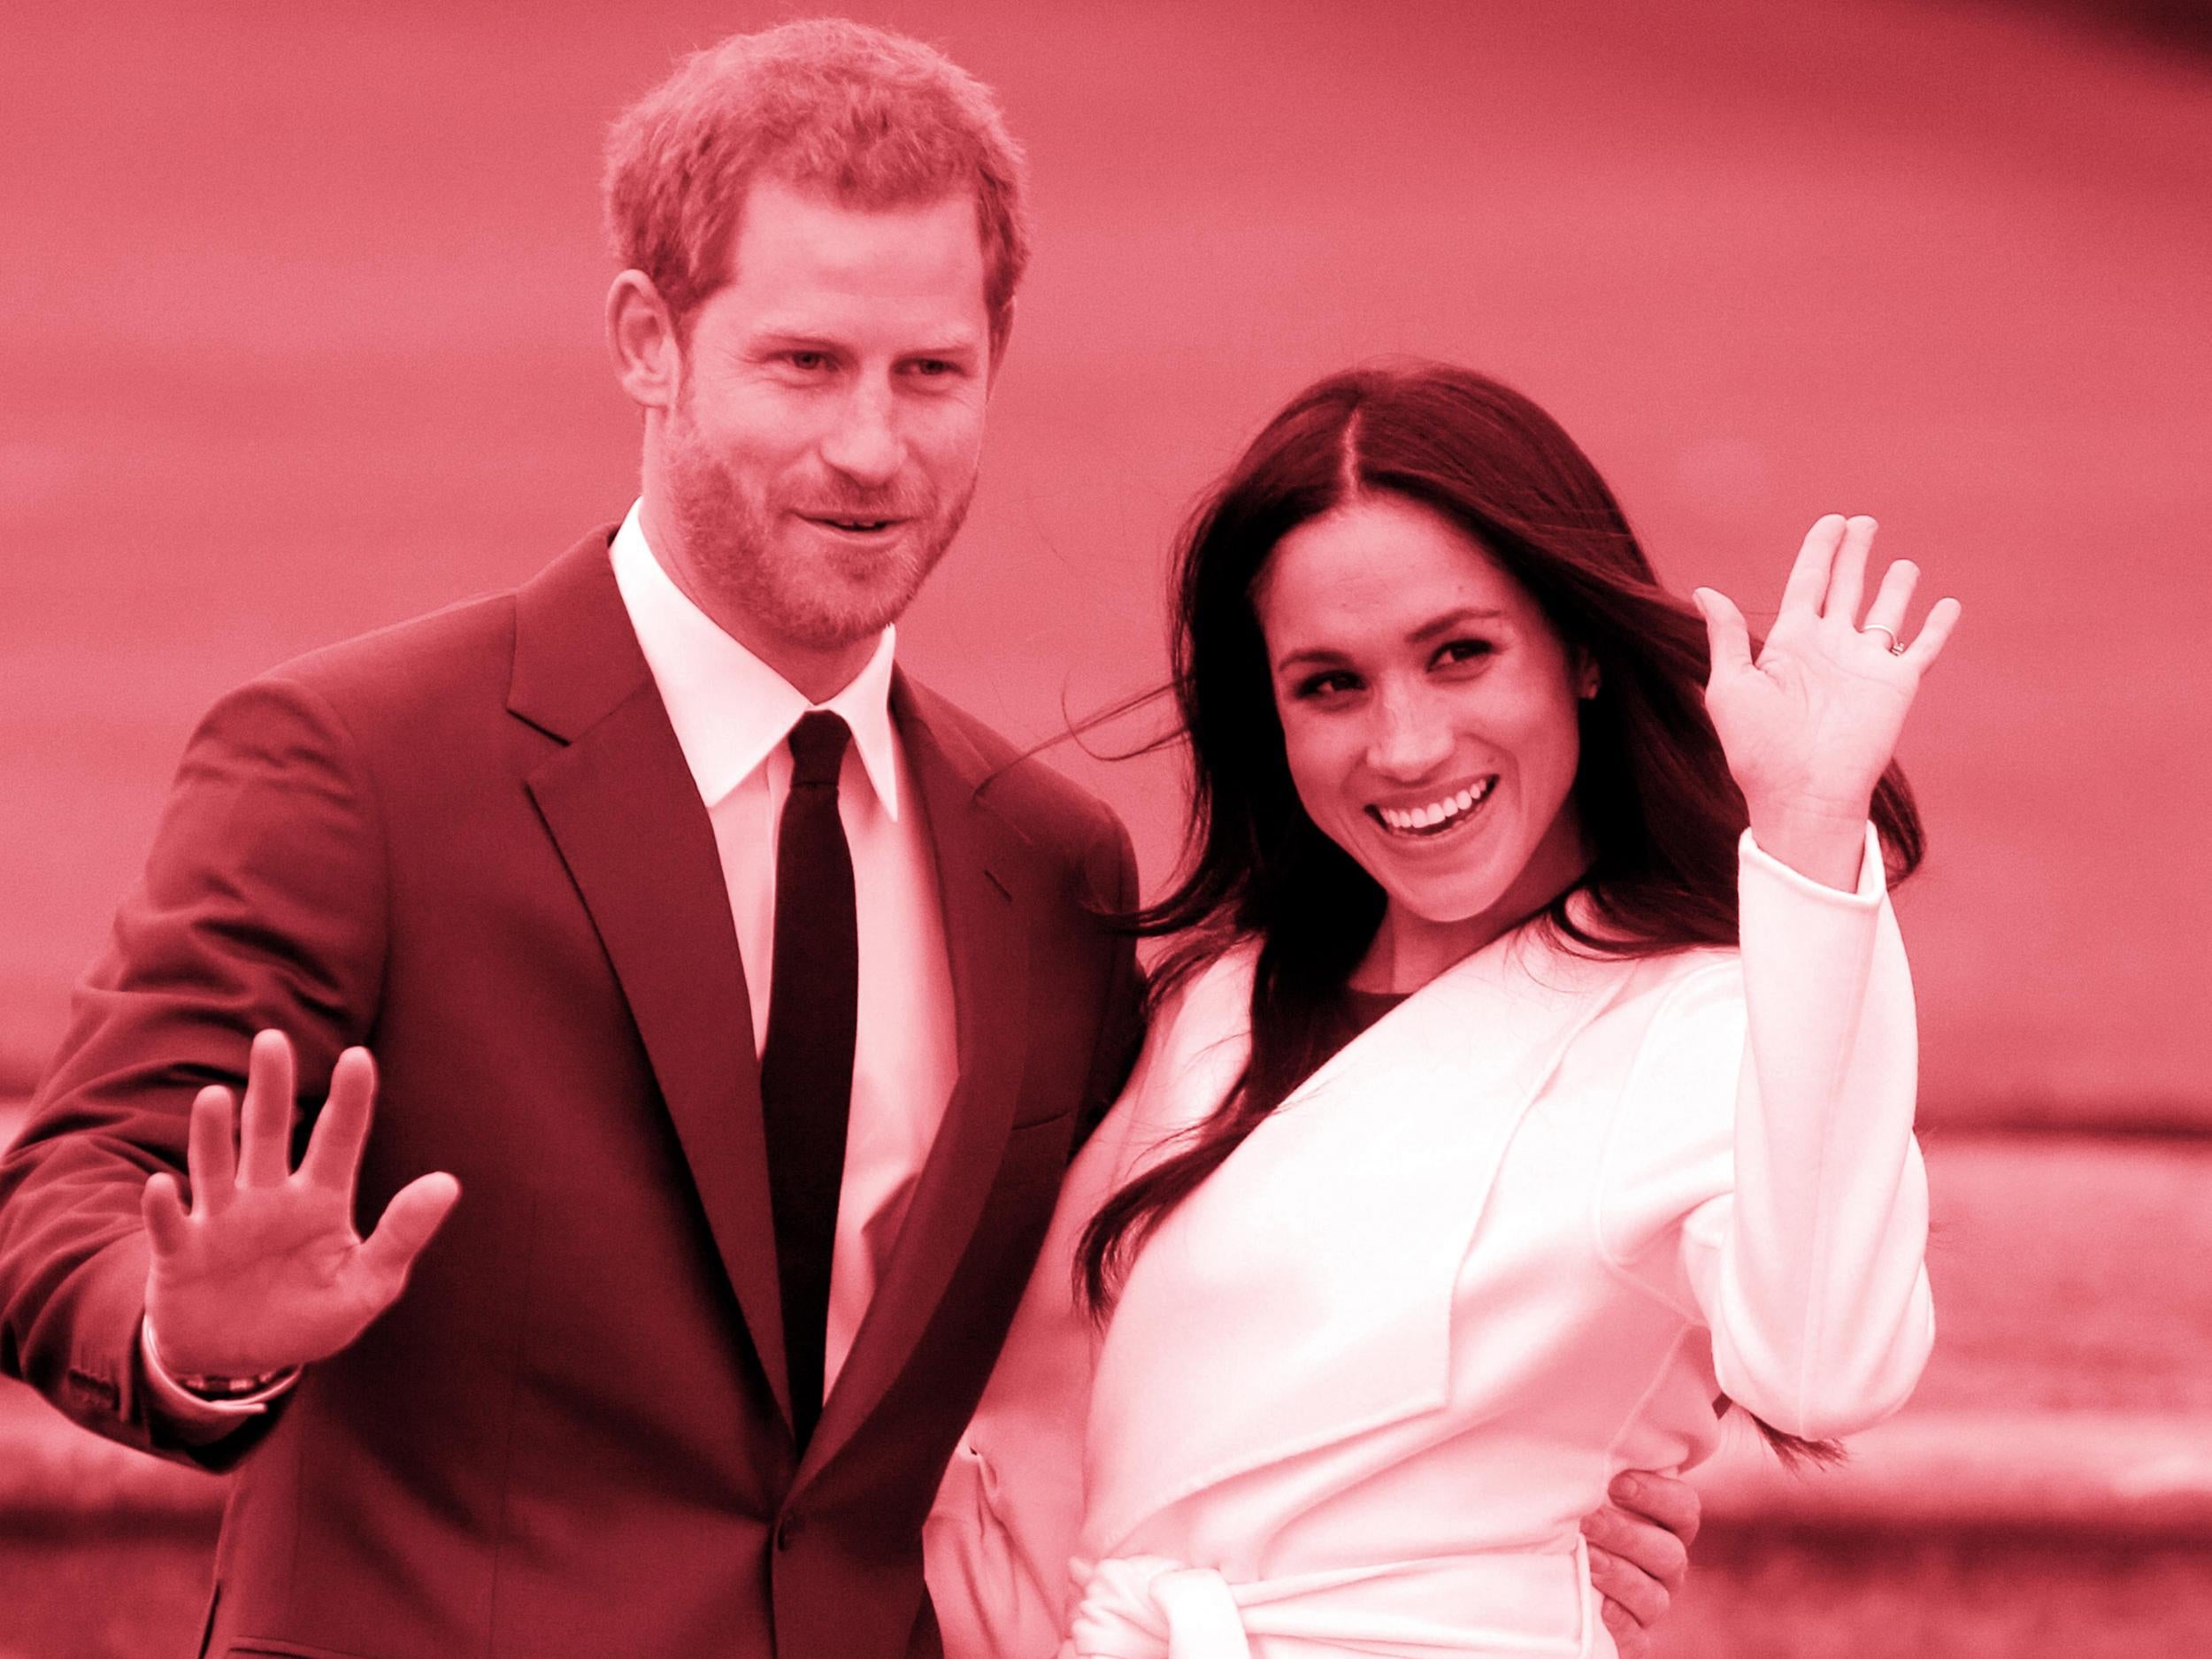 Meghan Markle isn't the first American to marry a member of the British royal family